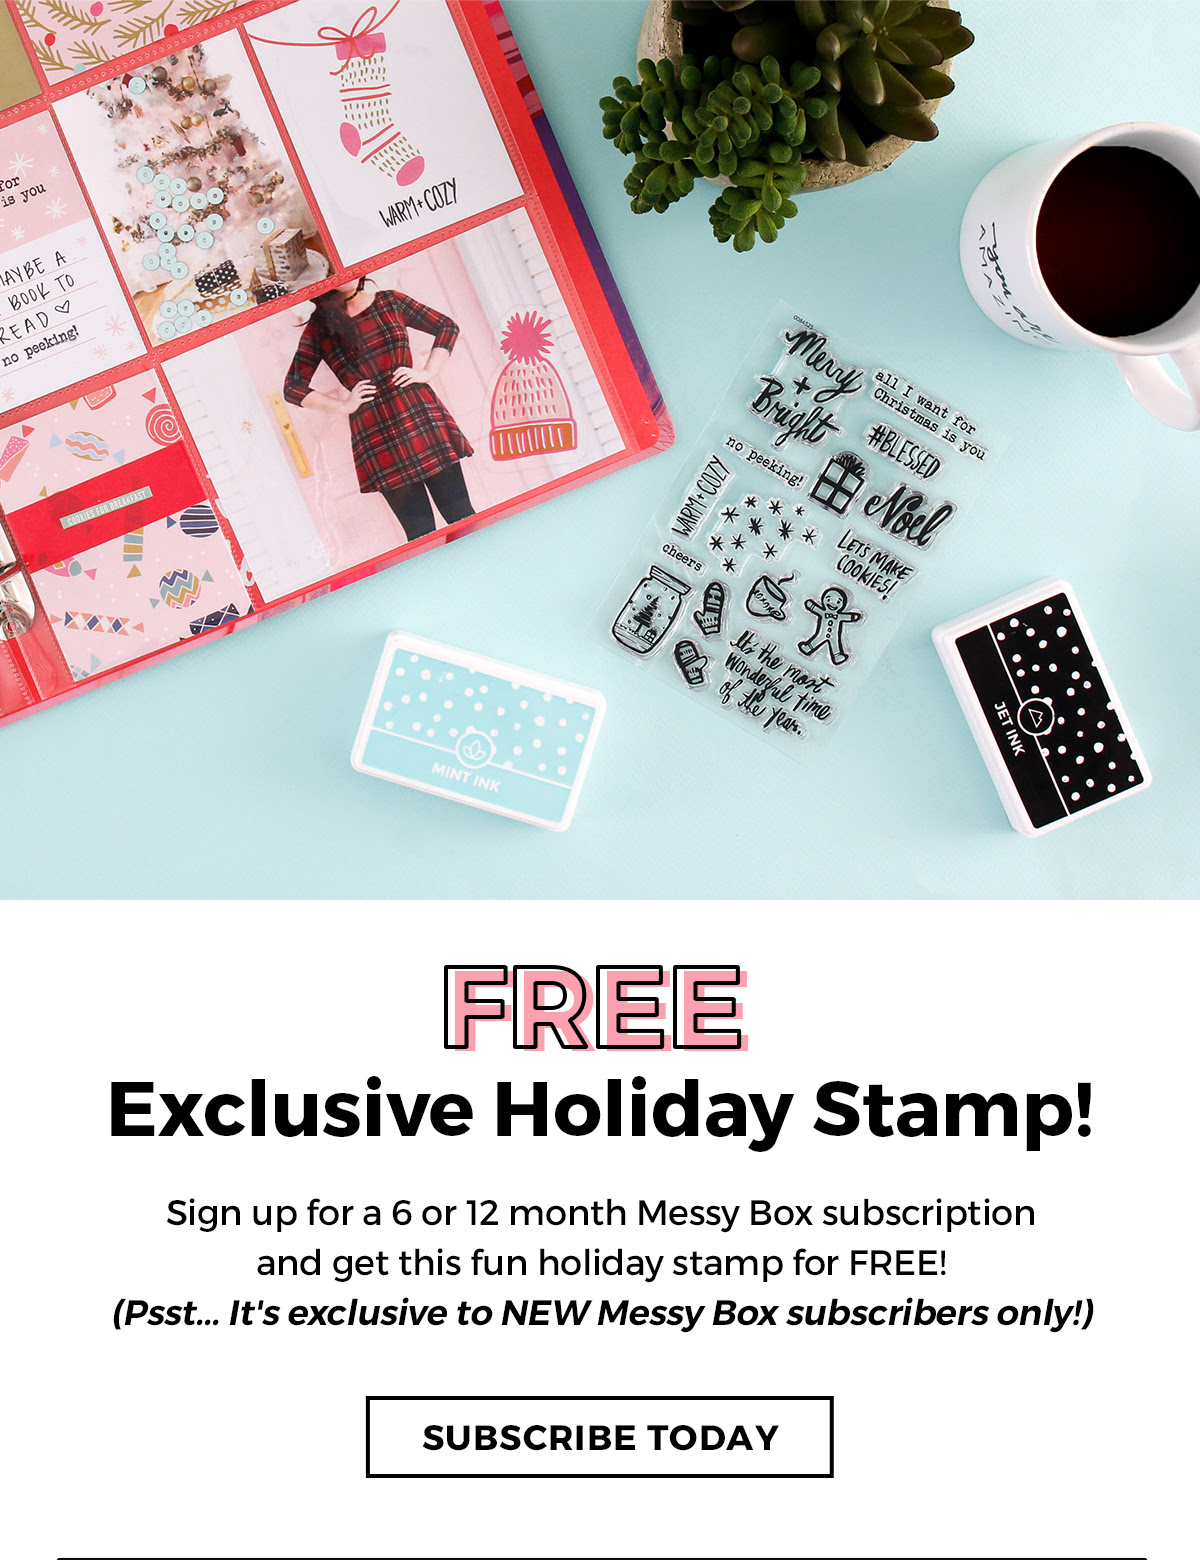 A Beautiful Mess Coupon – Free Holiday Stamp with First Messy Box!